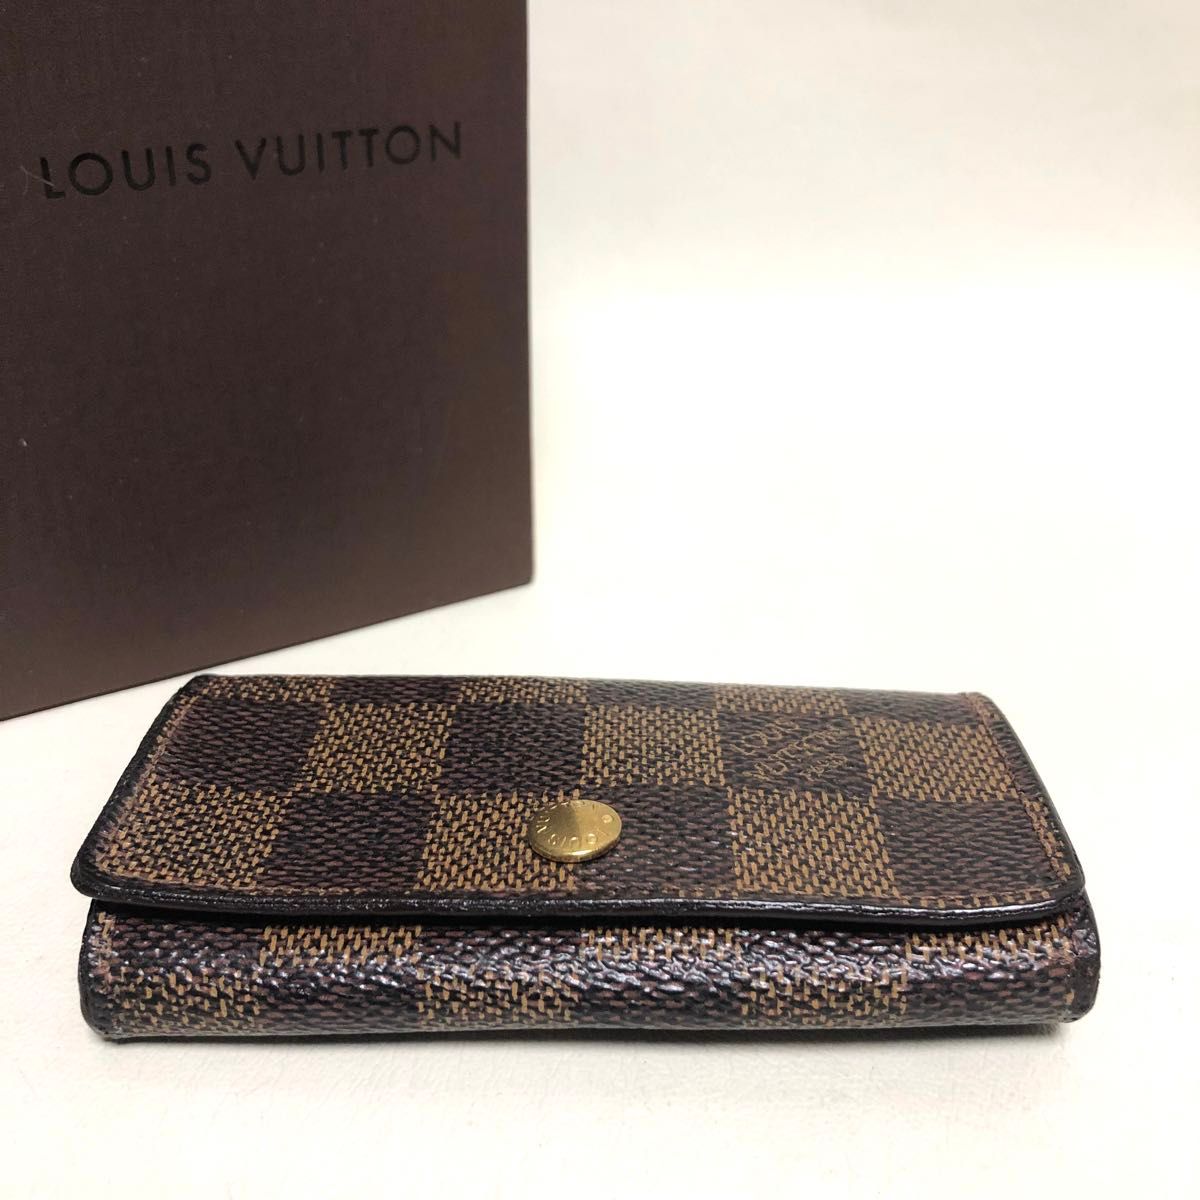 LOUIS VUITTON ルイヴィトン ダミエ 4連キーケース